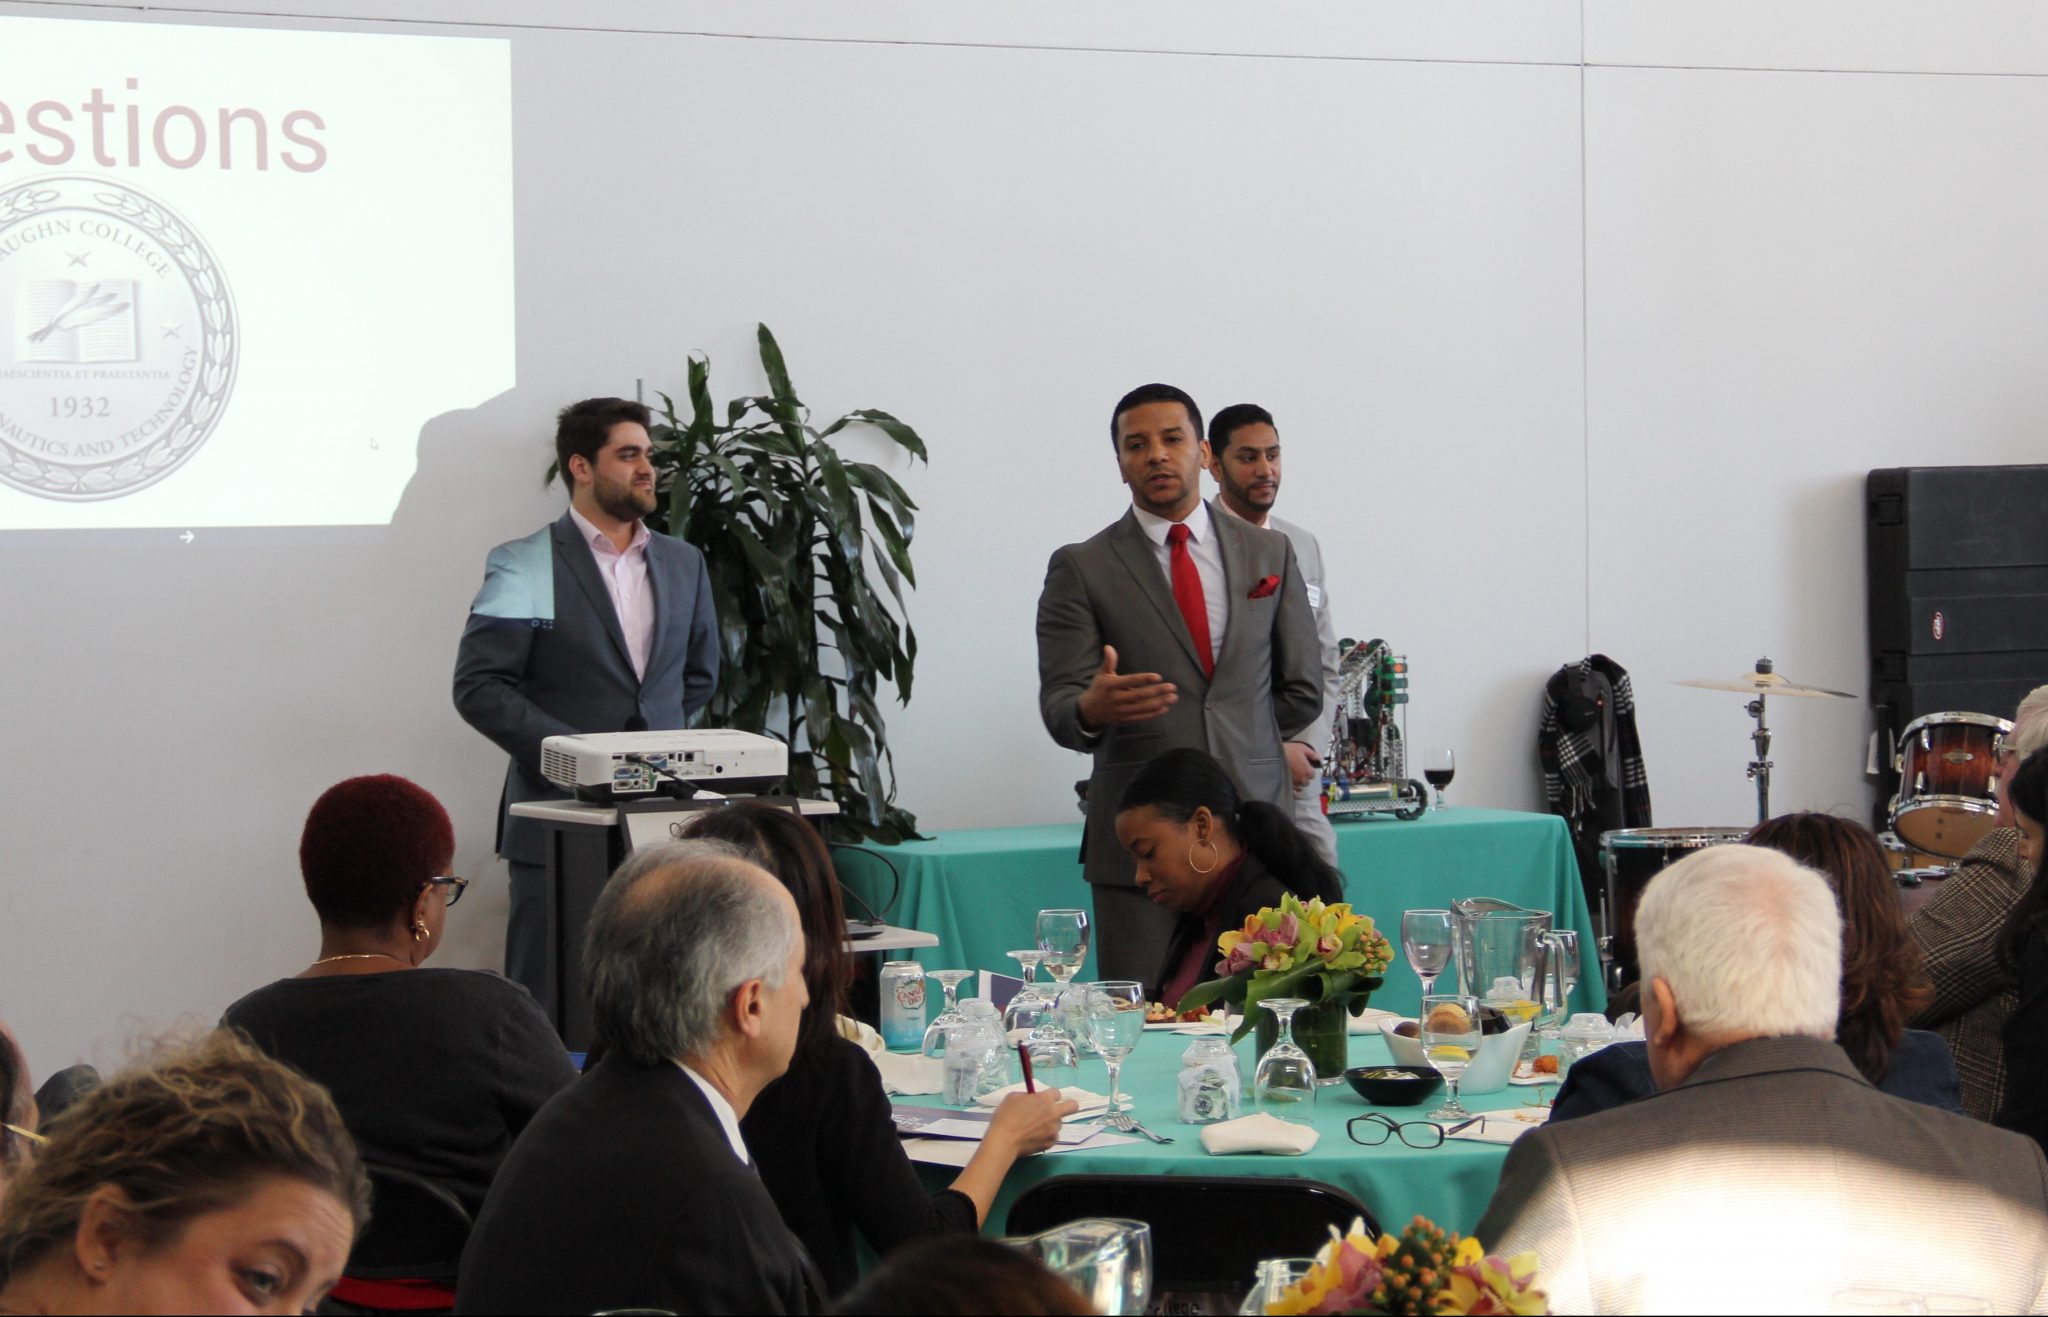 Annual Guidance Counselor Luncheon Held at Vaughn College